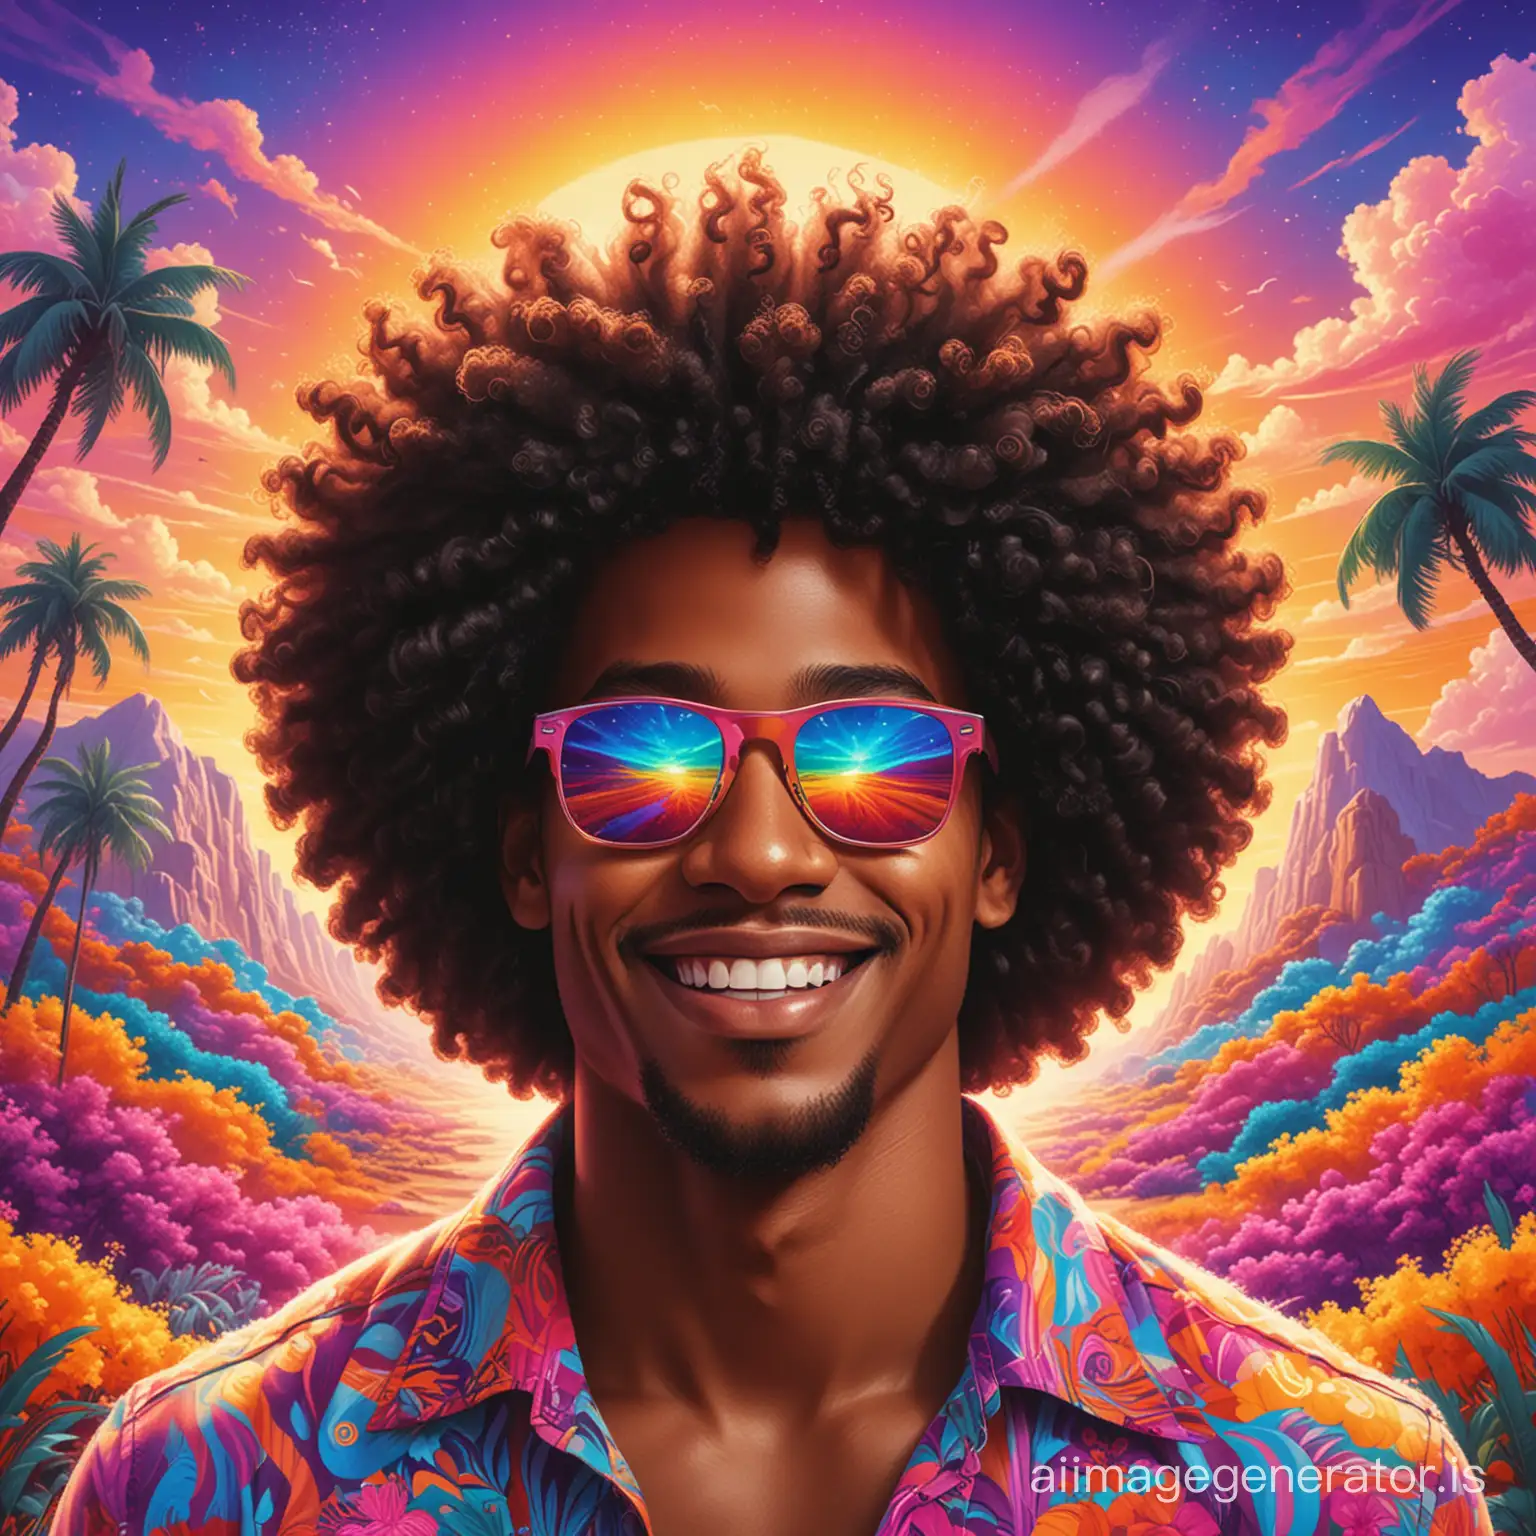 drawing of a happy black light skin man with sunglasses and long afro hair in a colorful landscape